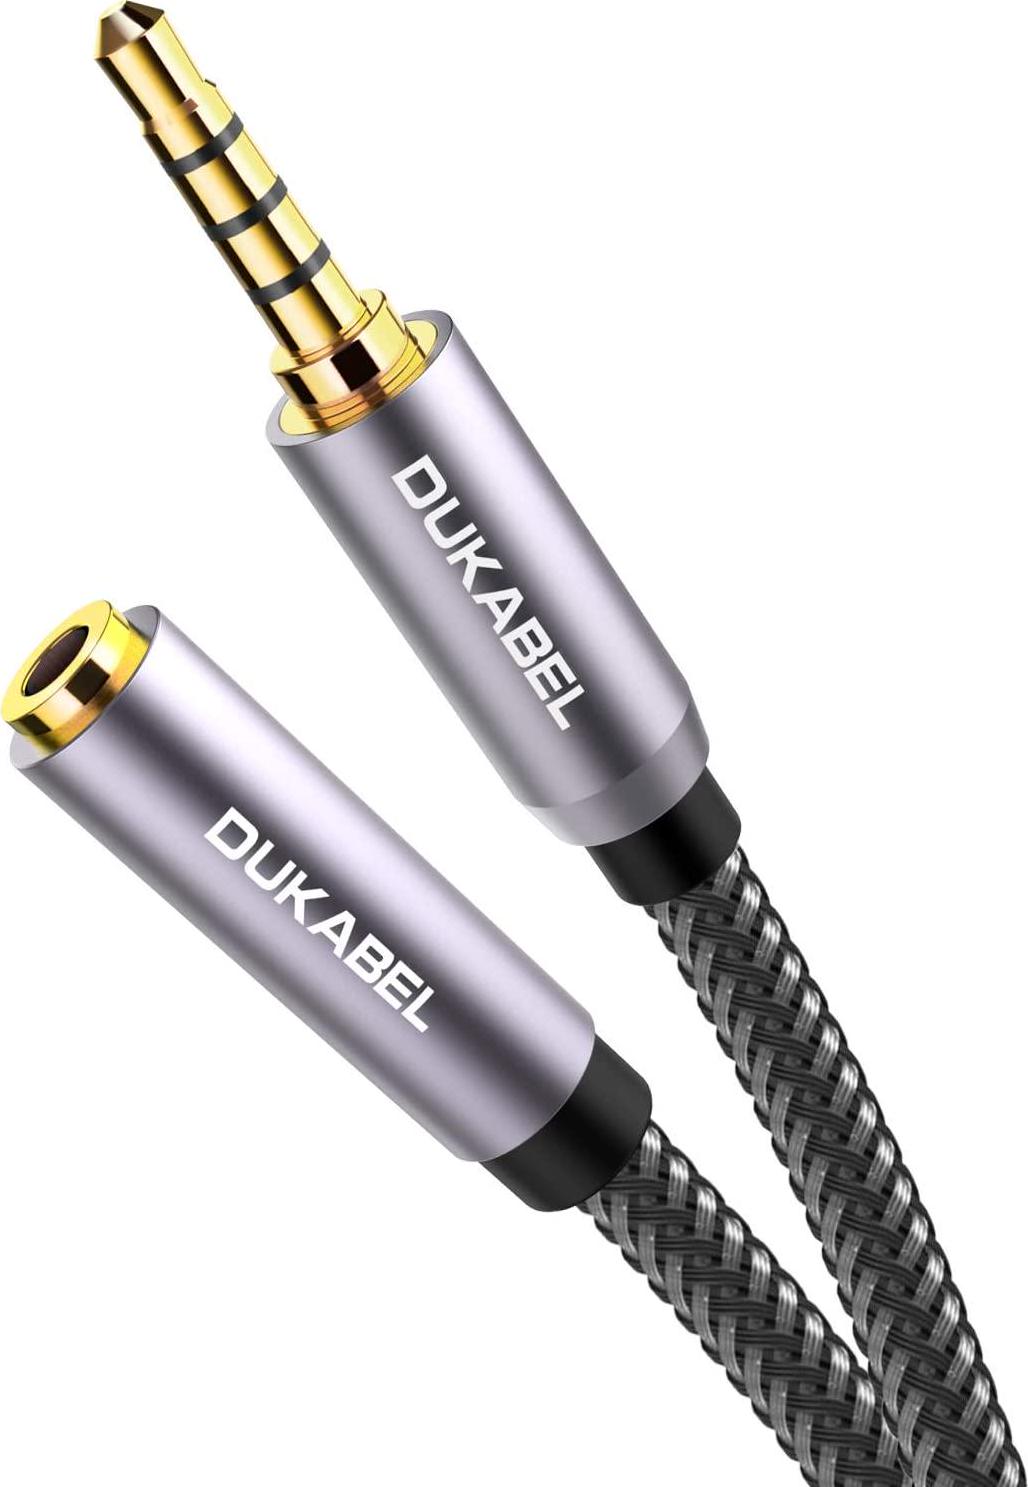 DuKabel, DuKabel Top Series Long 3.5mm Extension (16 Feet / 5 Meters) TRRS 4-Pole Headphone Cable Male to Female 3.5mm Audio Cable Crystal-Nylon Braided/ 24K Gold Plated/ 99.99% 4N OFC Conductor